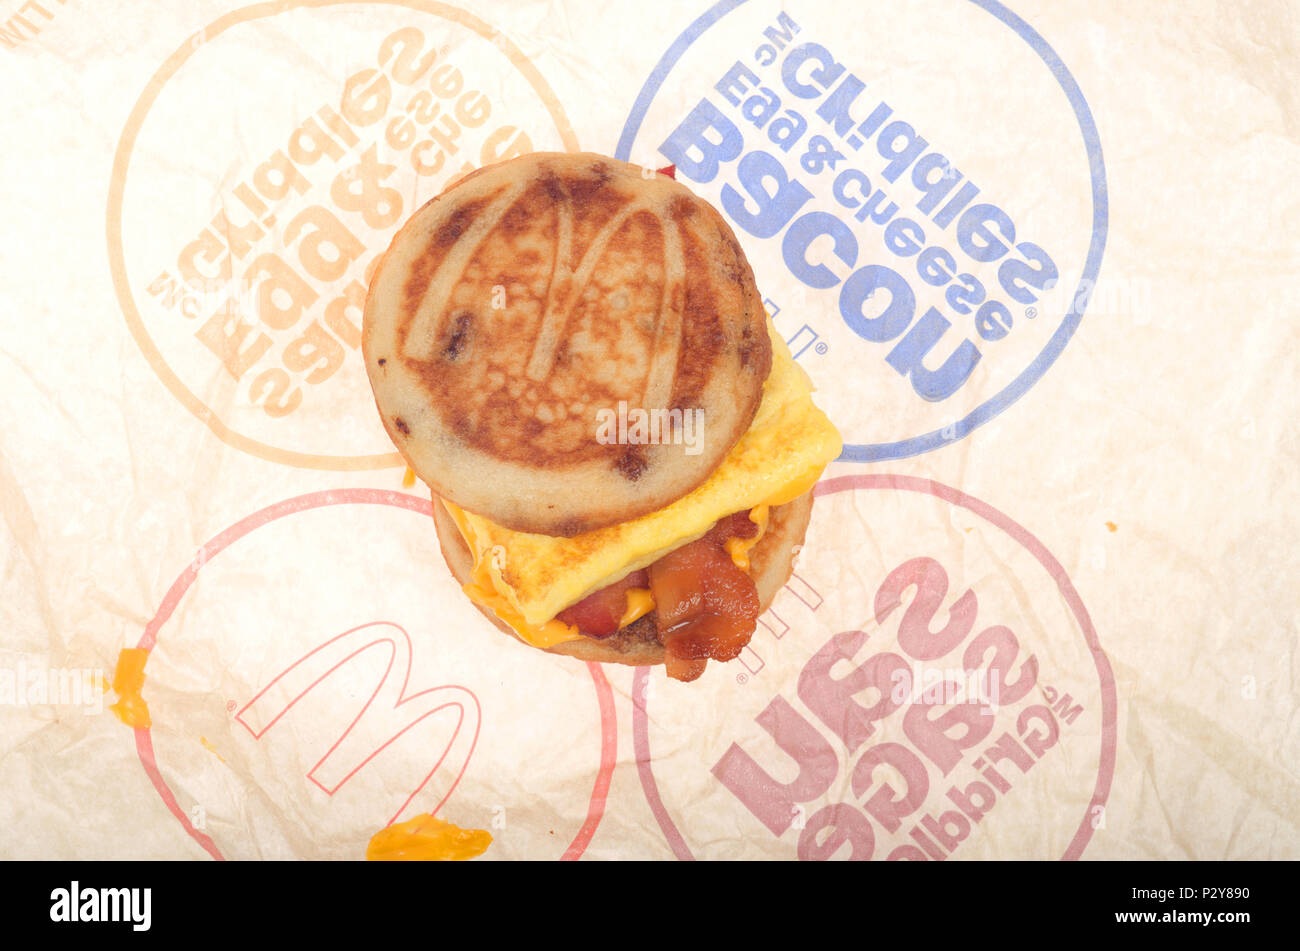 McDonald’s bacon, egg and cheese McGriddle on wrapper Stock Photo